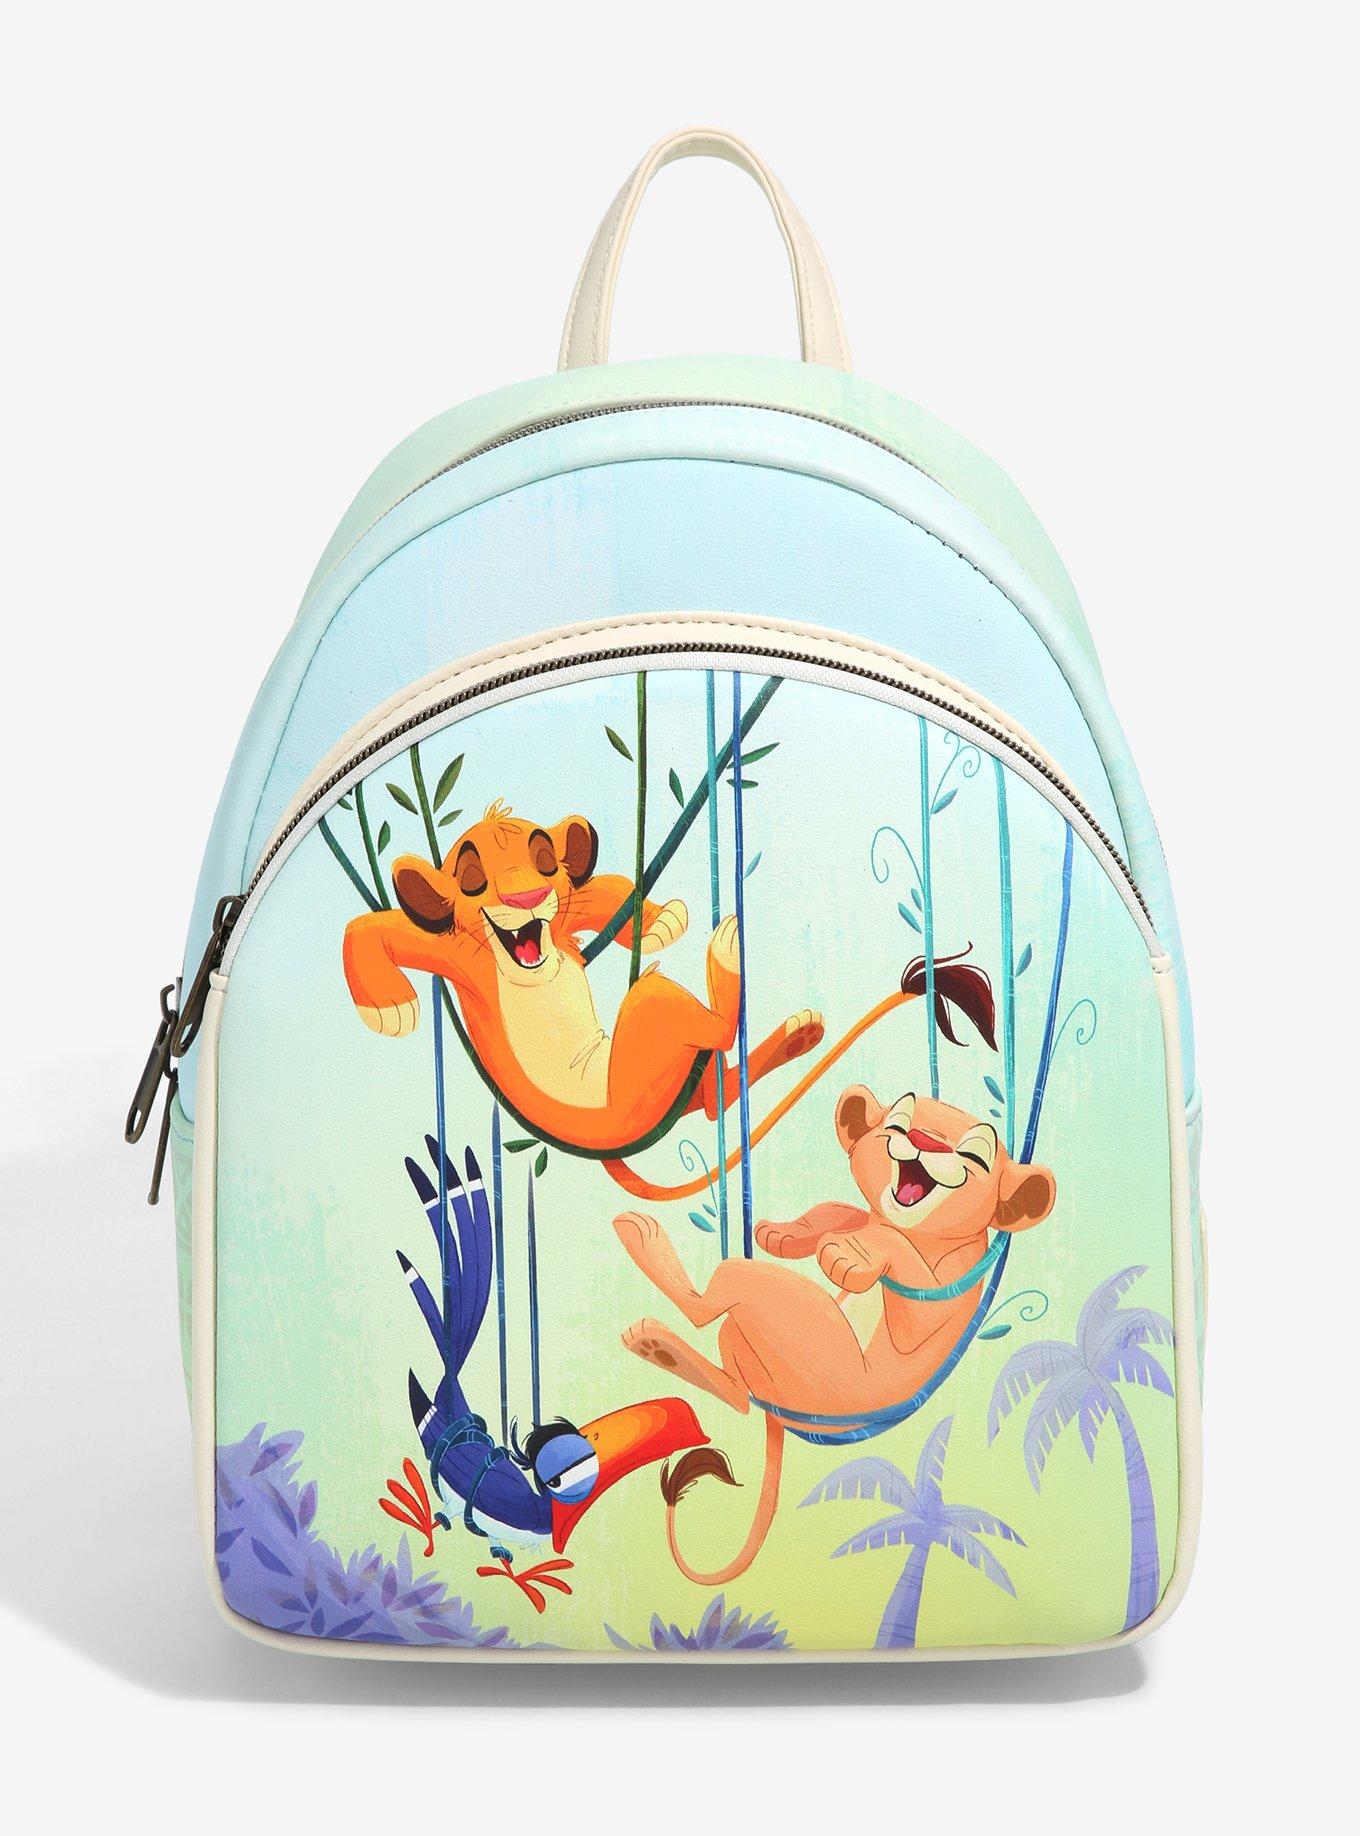 Persona Esquivo Mal humor Loungefly Disney The Lion King No Worries Mini Backpack | Hot Topic